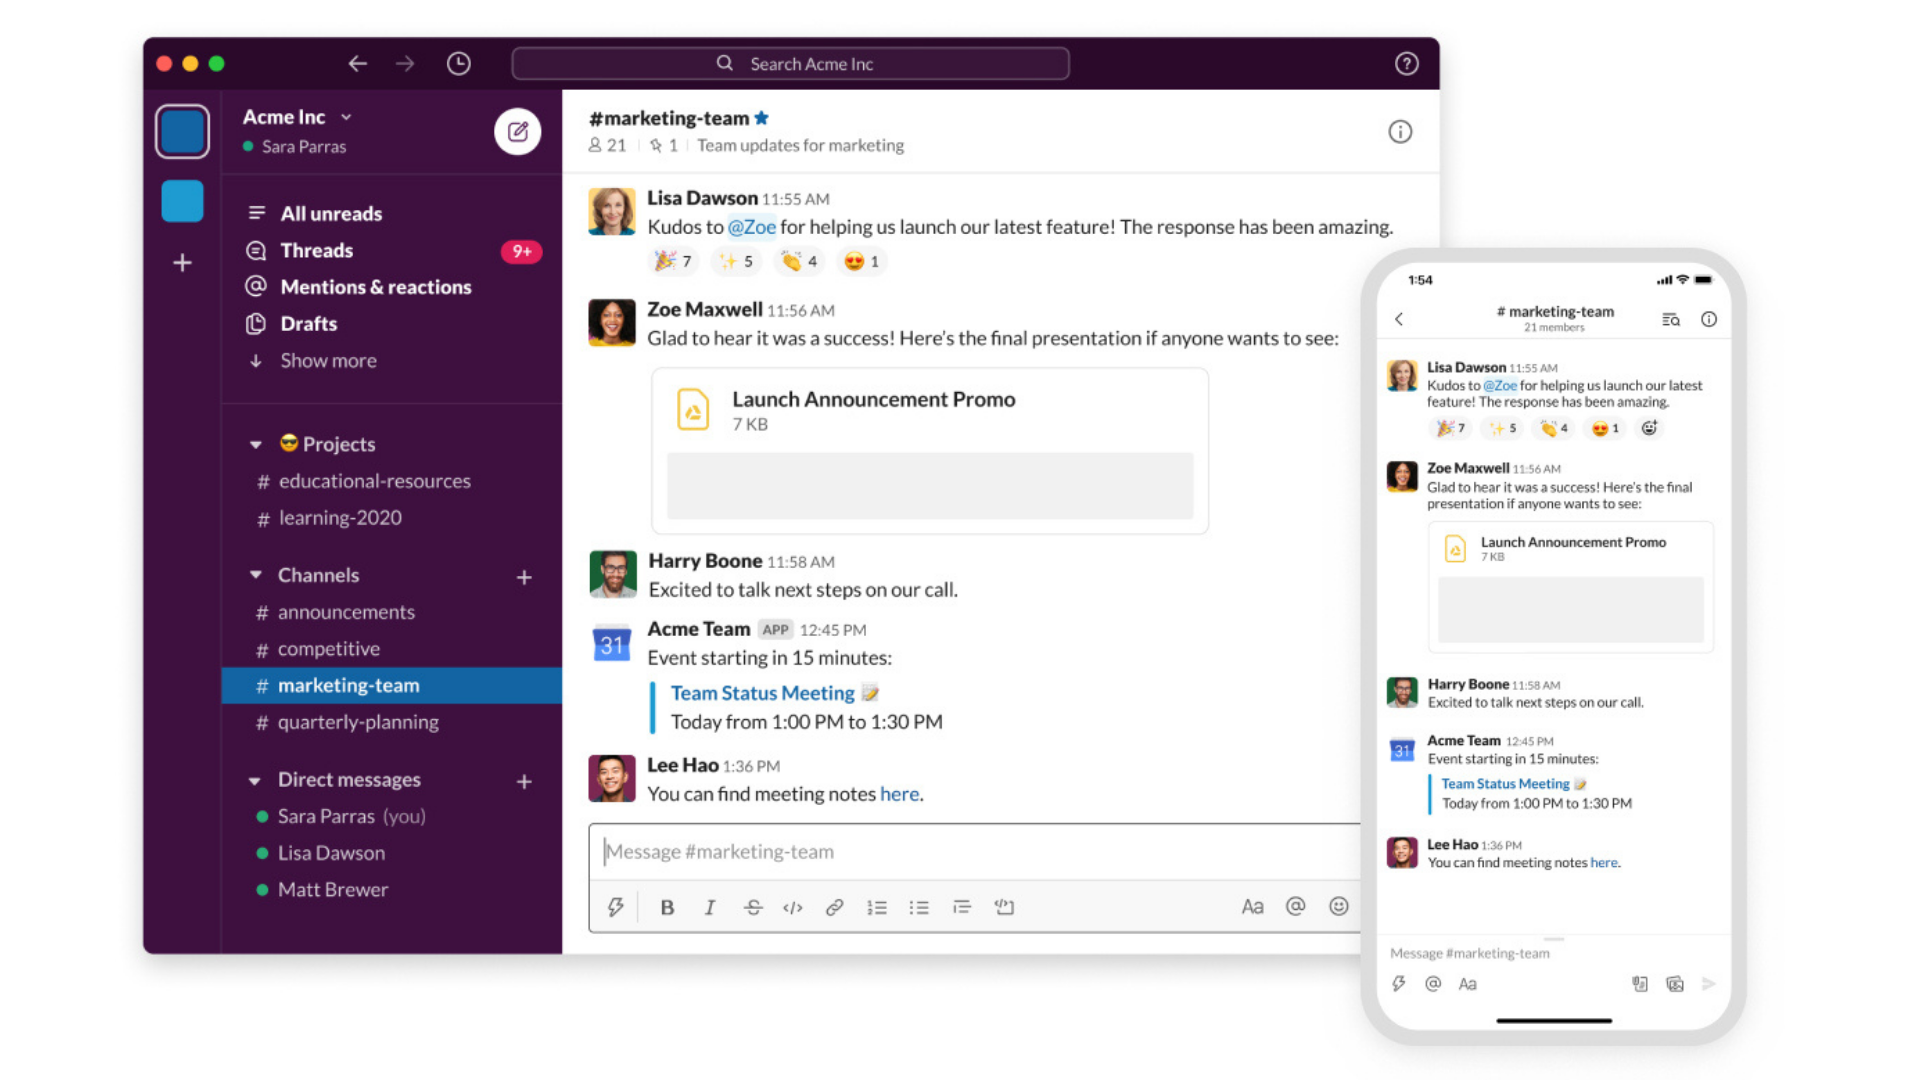 This Slack screenshot shows the different ways teams can communicate and organize their messages in the desktop or mobile app